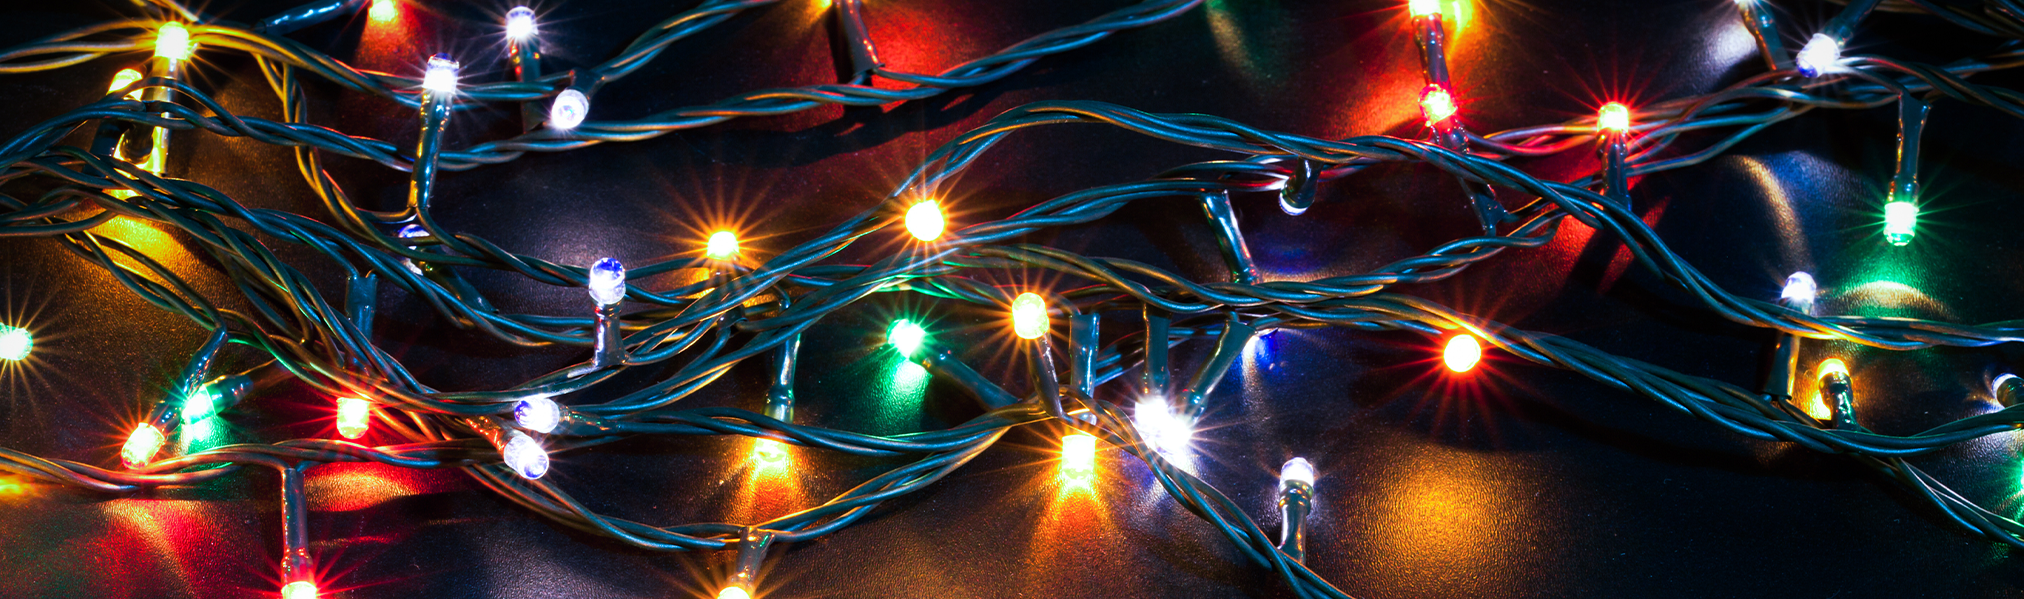 Making spirits bright with the science of Christmas lights